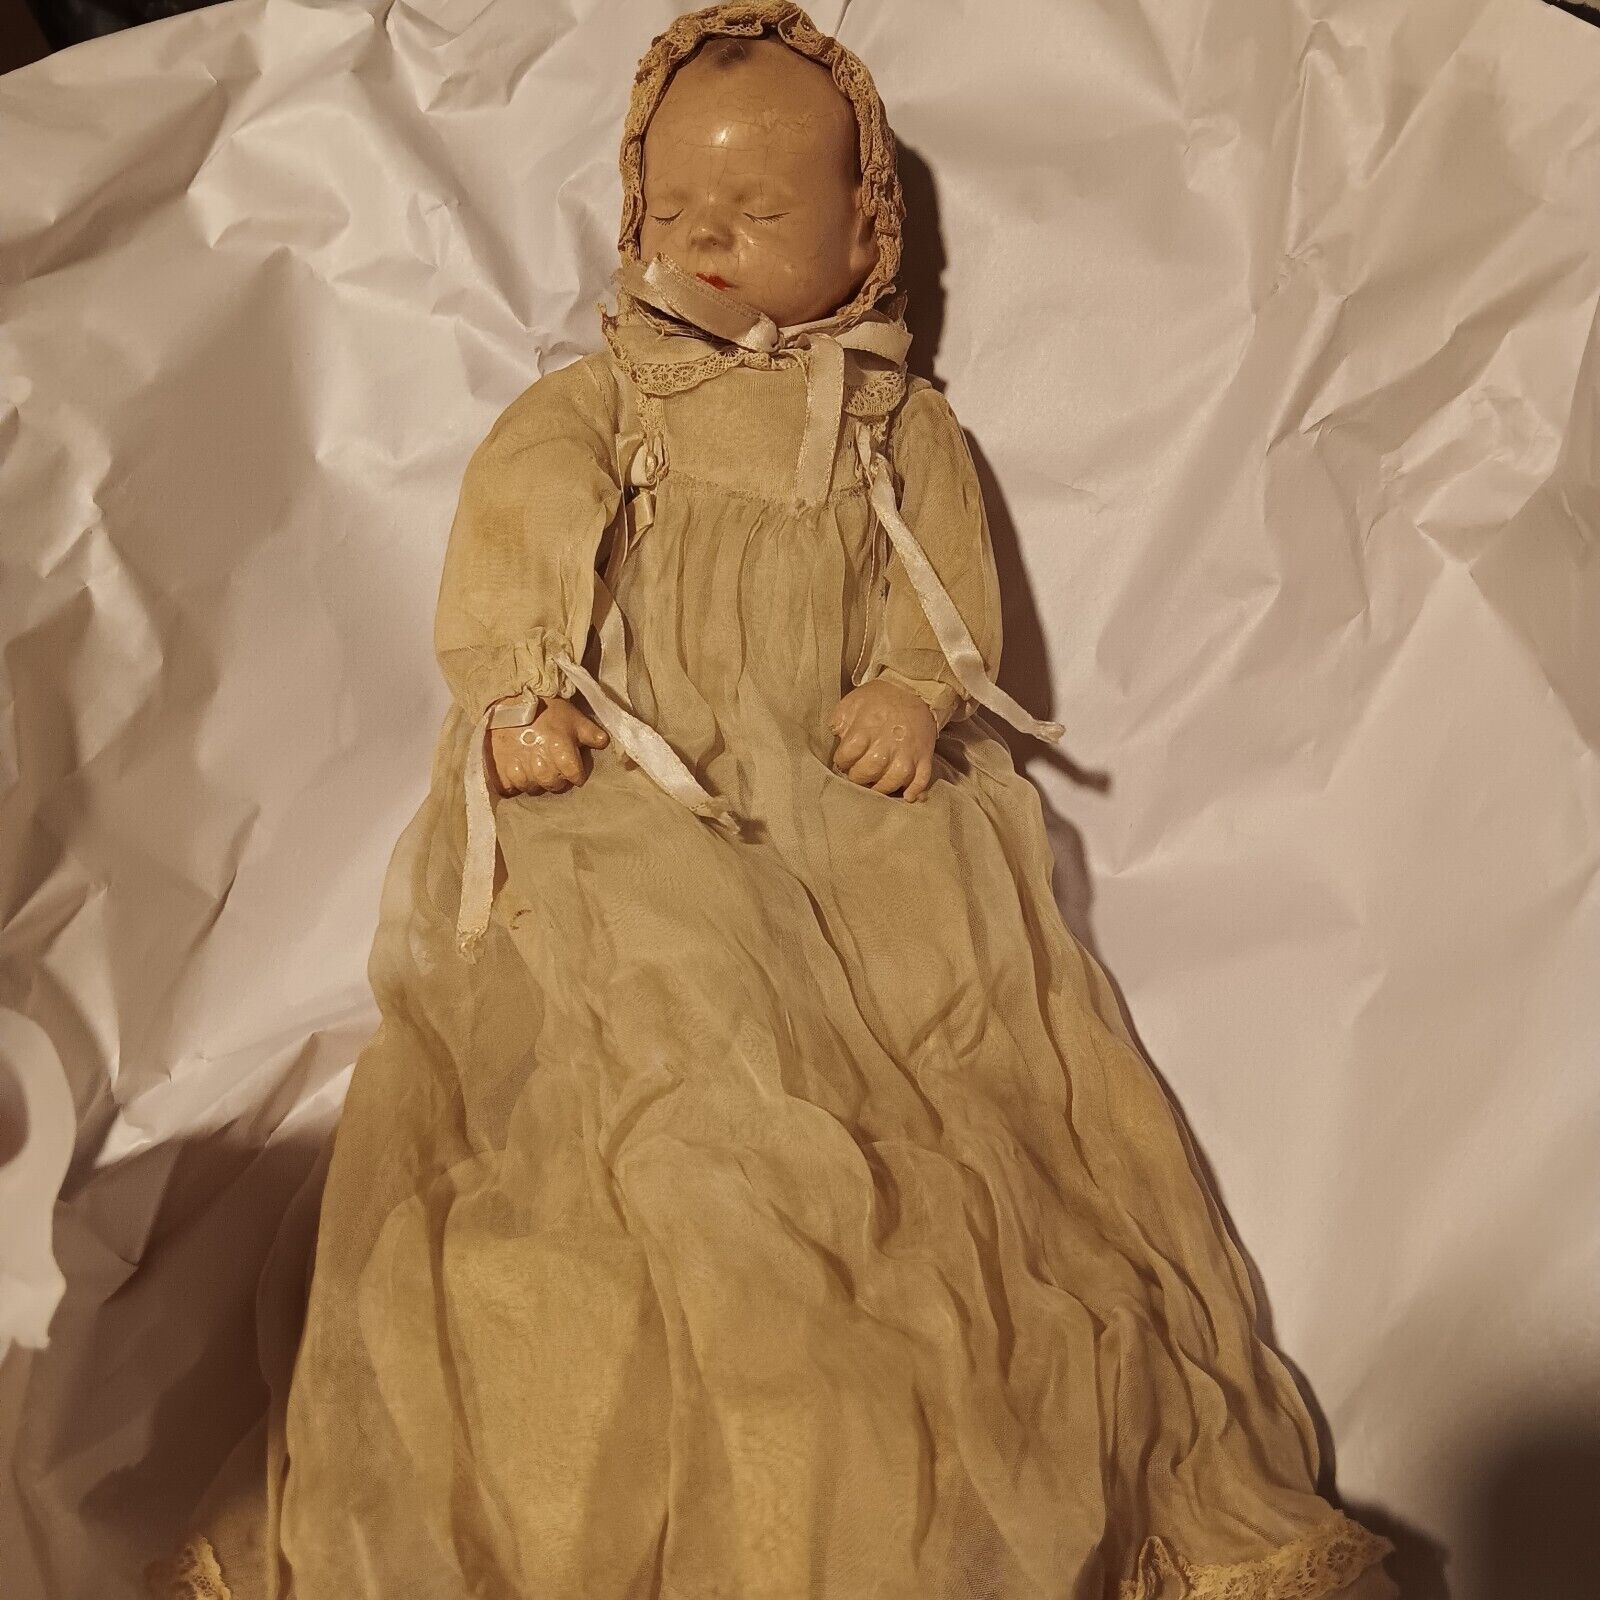 Antique Porclain Head And Hands Doll